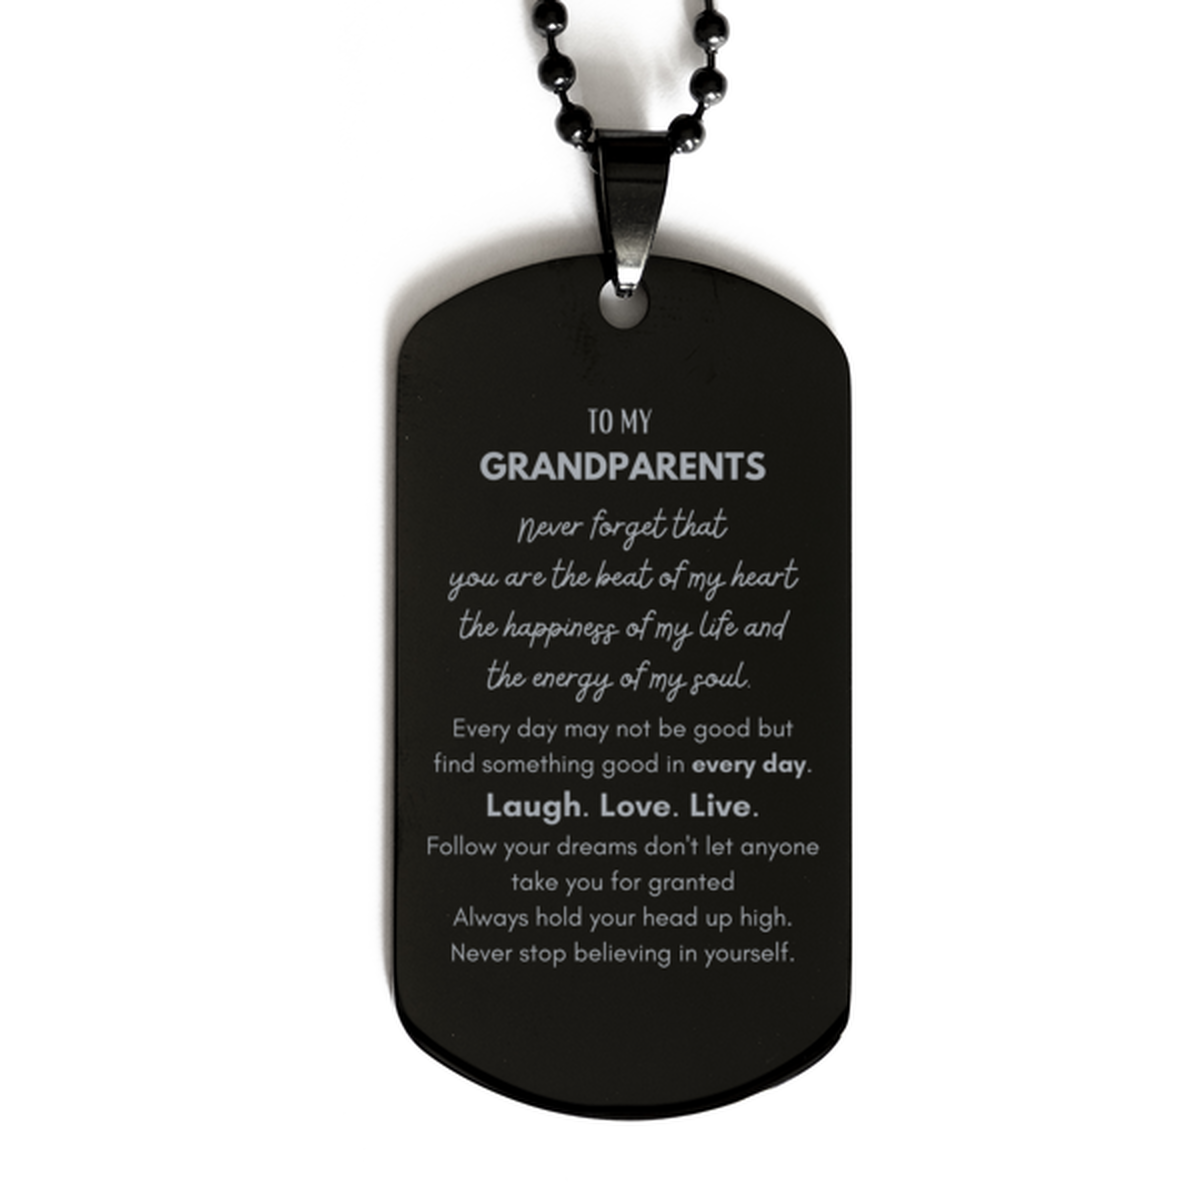 To My Grandparents Dogtag Gifts, Christmas Grandparents Black Dog Tag Present, Birthday Unique Motivational For Grandparents, To My Grandparents Never forget that you are the beat of my heart the happiness of my life and the energy of my soul